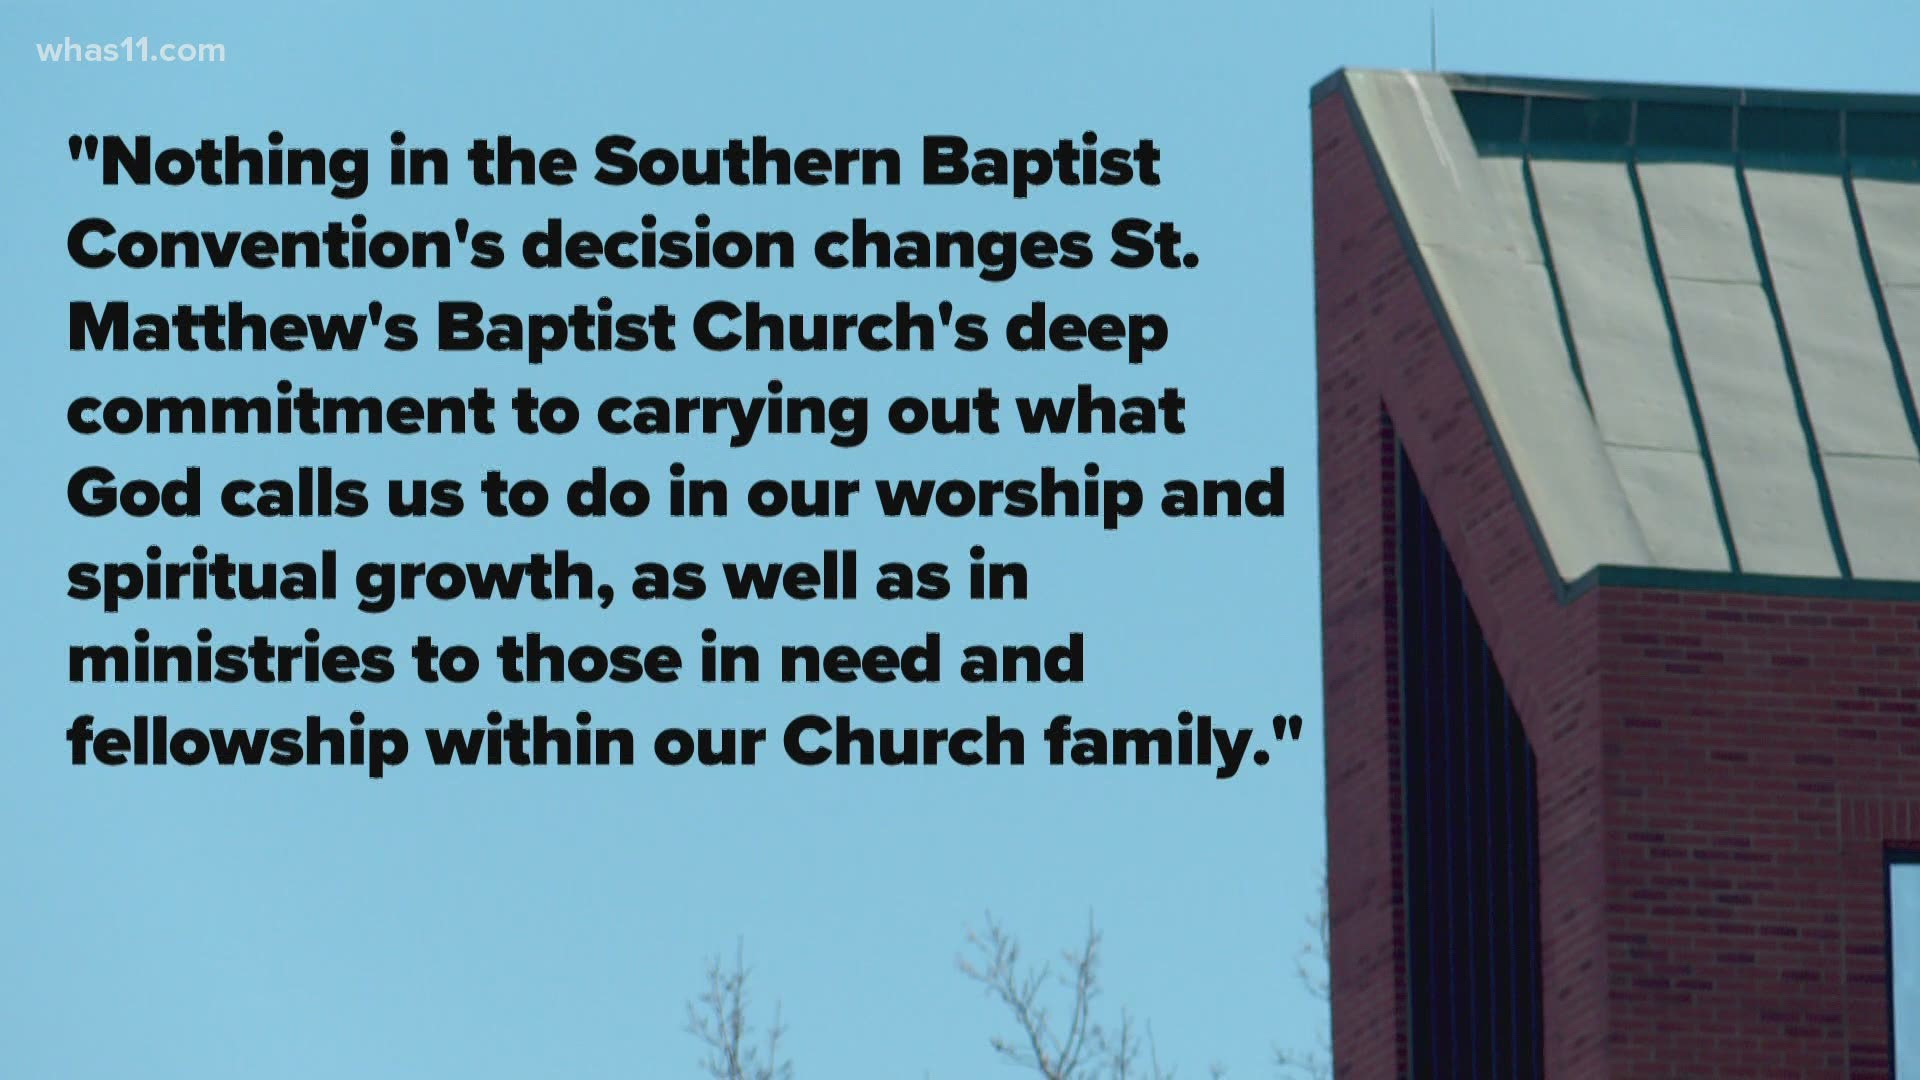 The Southern Baptist Convention voted Tuesday to expel St. Matthews Baptist Church for its stance on not excluding members who identify as LGBTQ.